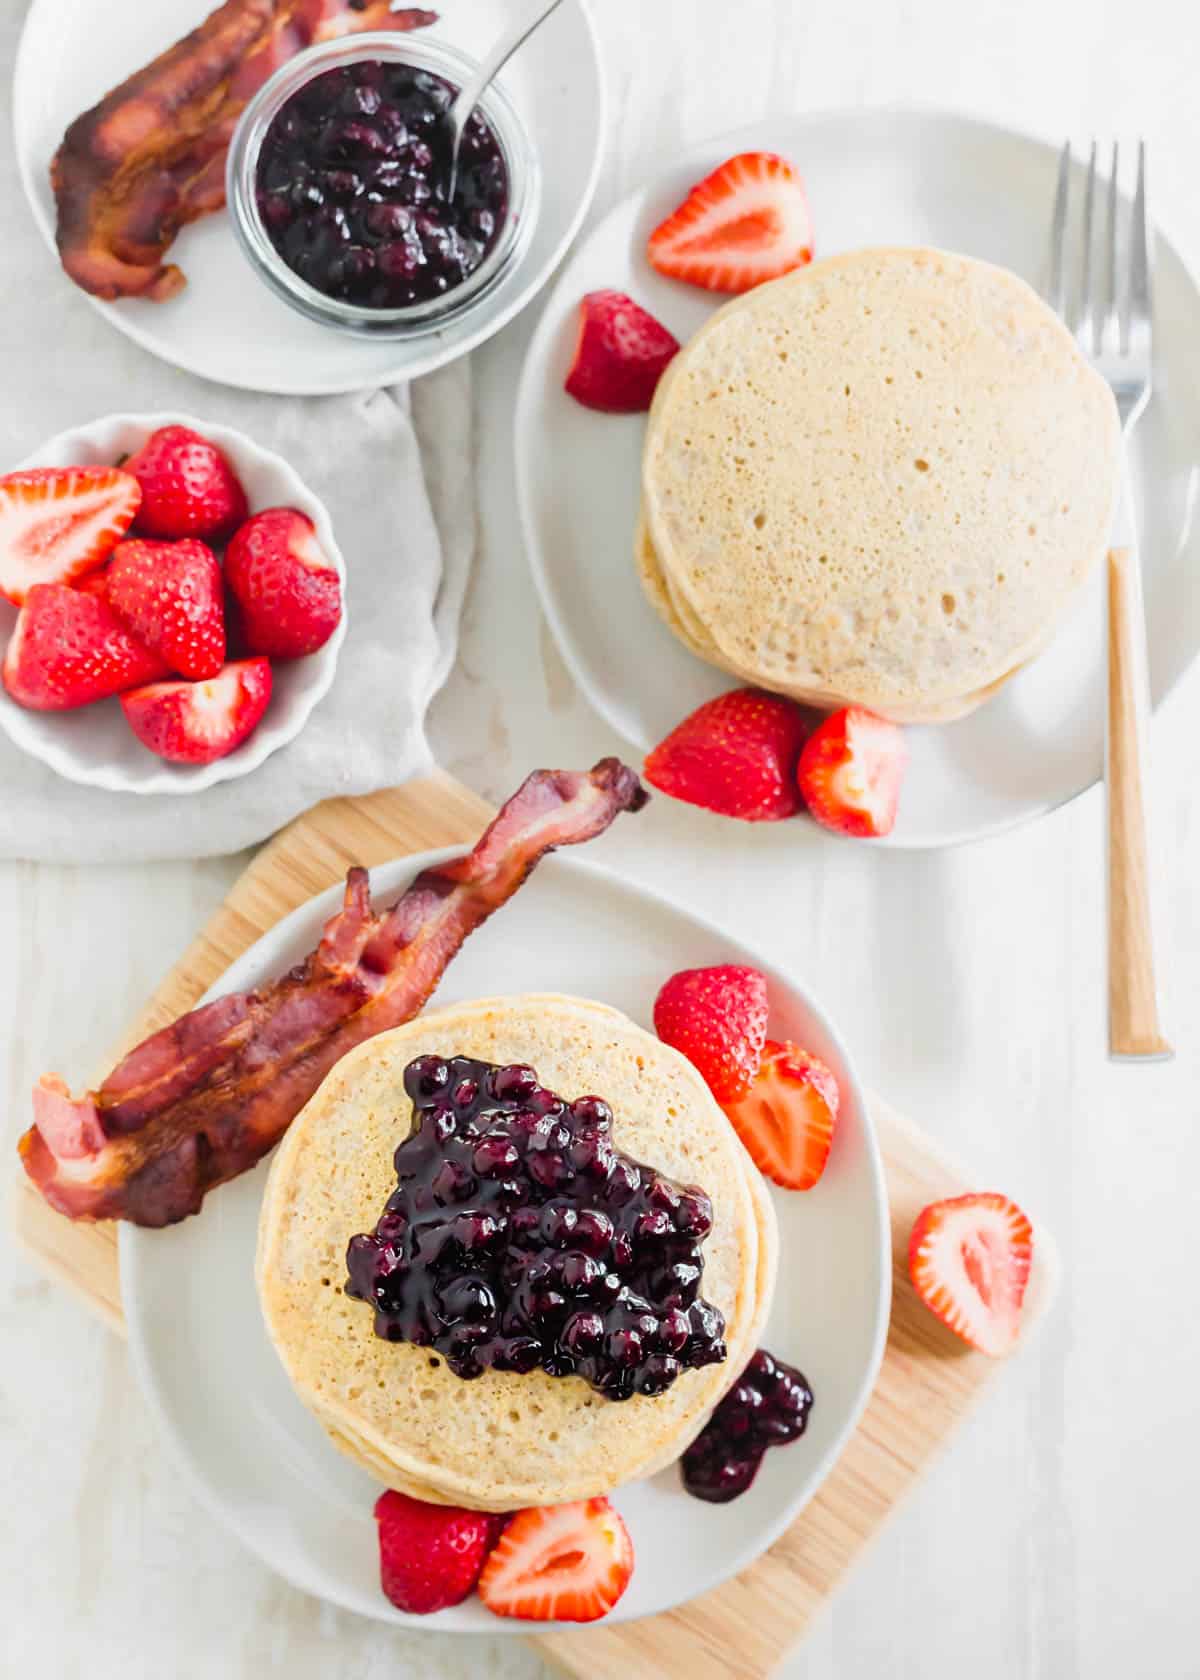 Stacks of cassava flour pancakes with strawberries and bacon.